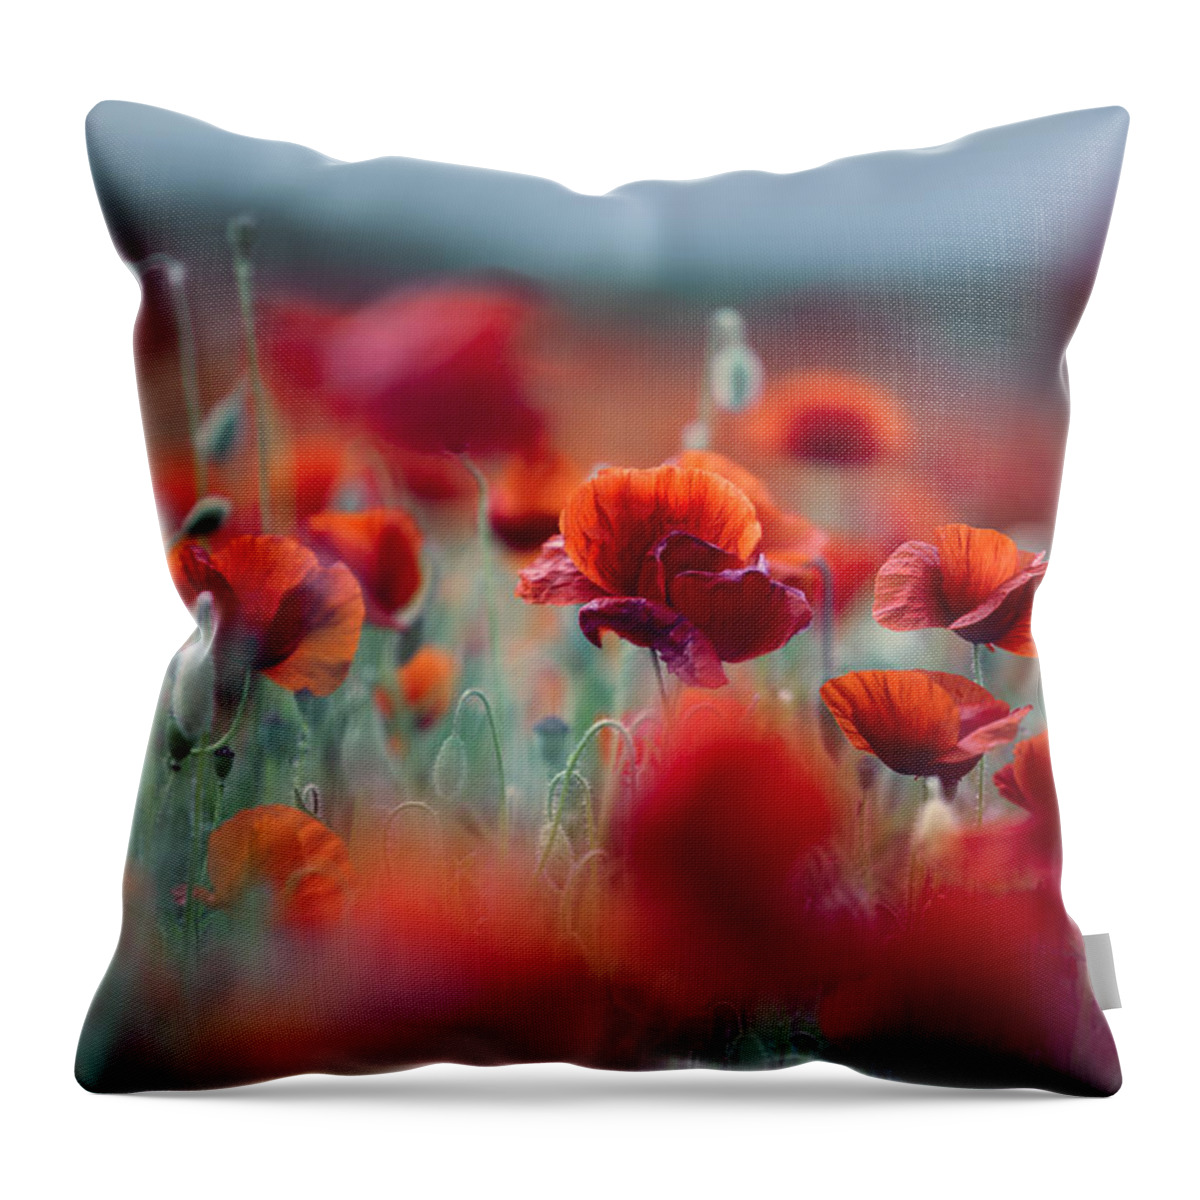 Poppy Throw Pillow featuring the photograph Summer Poppy Meadow by Nailia Schwarz